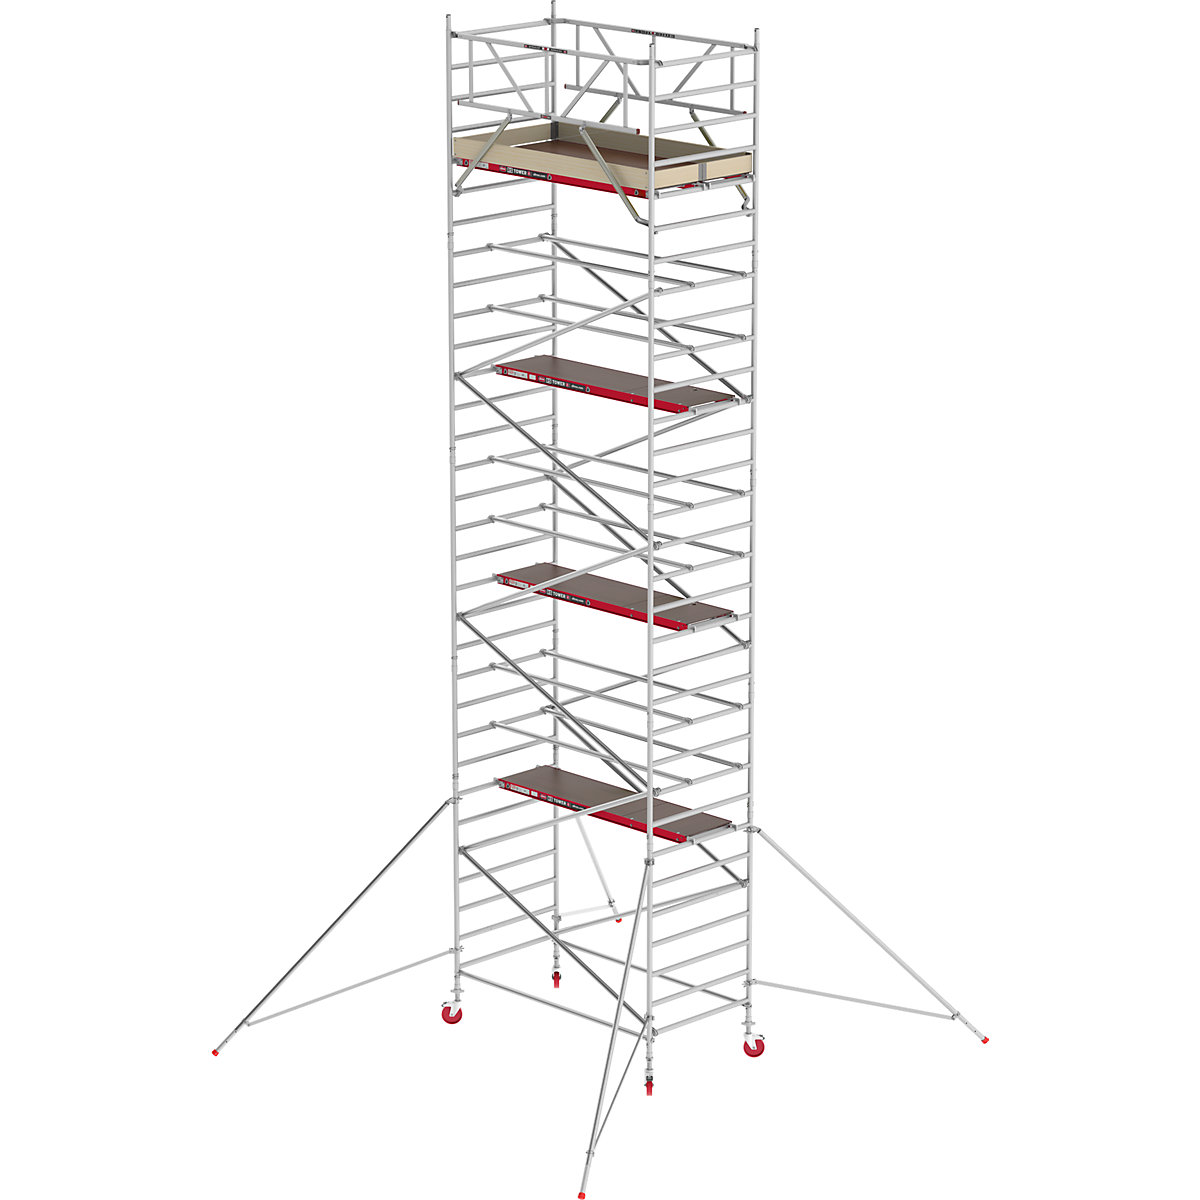 RS TOWER 42 wide mobile access tower – Altrex, wooden platform, length 1.85 m, working height 10.20 m-10